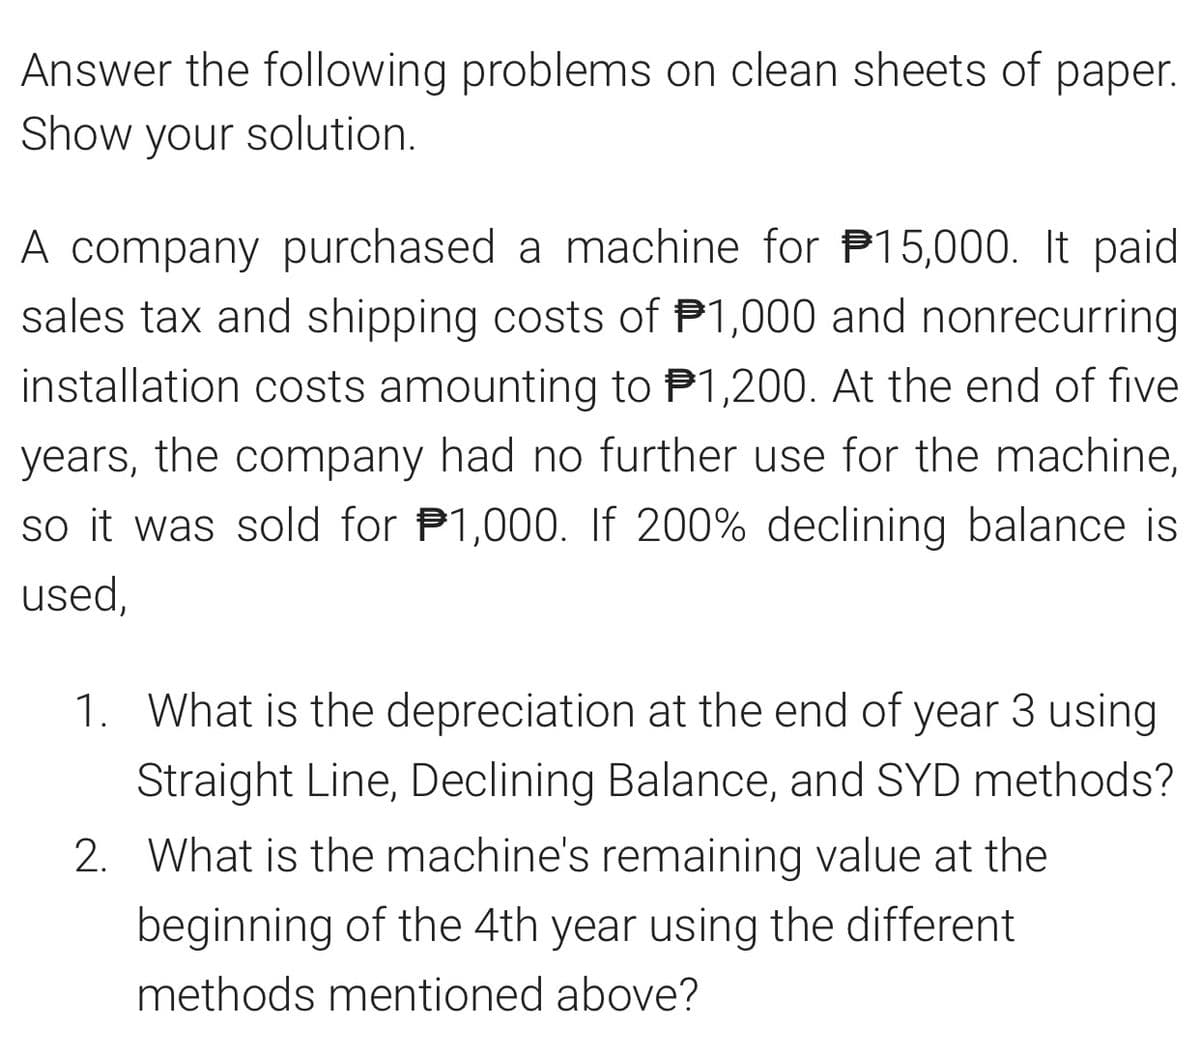 Answer the following problems on clean sheets of paper.
Show your solution.
A company purchased a machine for P15,000. It paid
sales tax and shipping costs of 1,000 and nonrecurring
installation costs amounting to ₹1,200. At the end of five
years, the company had no further use for the machine,
so it was sold for $1,000. If 200% declining balance is
used,
1. What is the depreciation at the end of year 3 using
Straight Line, Declining Balance, and SYD methods?
2. What is the machine's remaining value at the
beginning of the 4th year using the different
methods mentioned above?